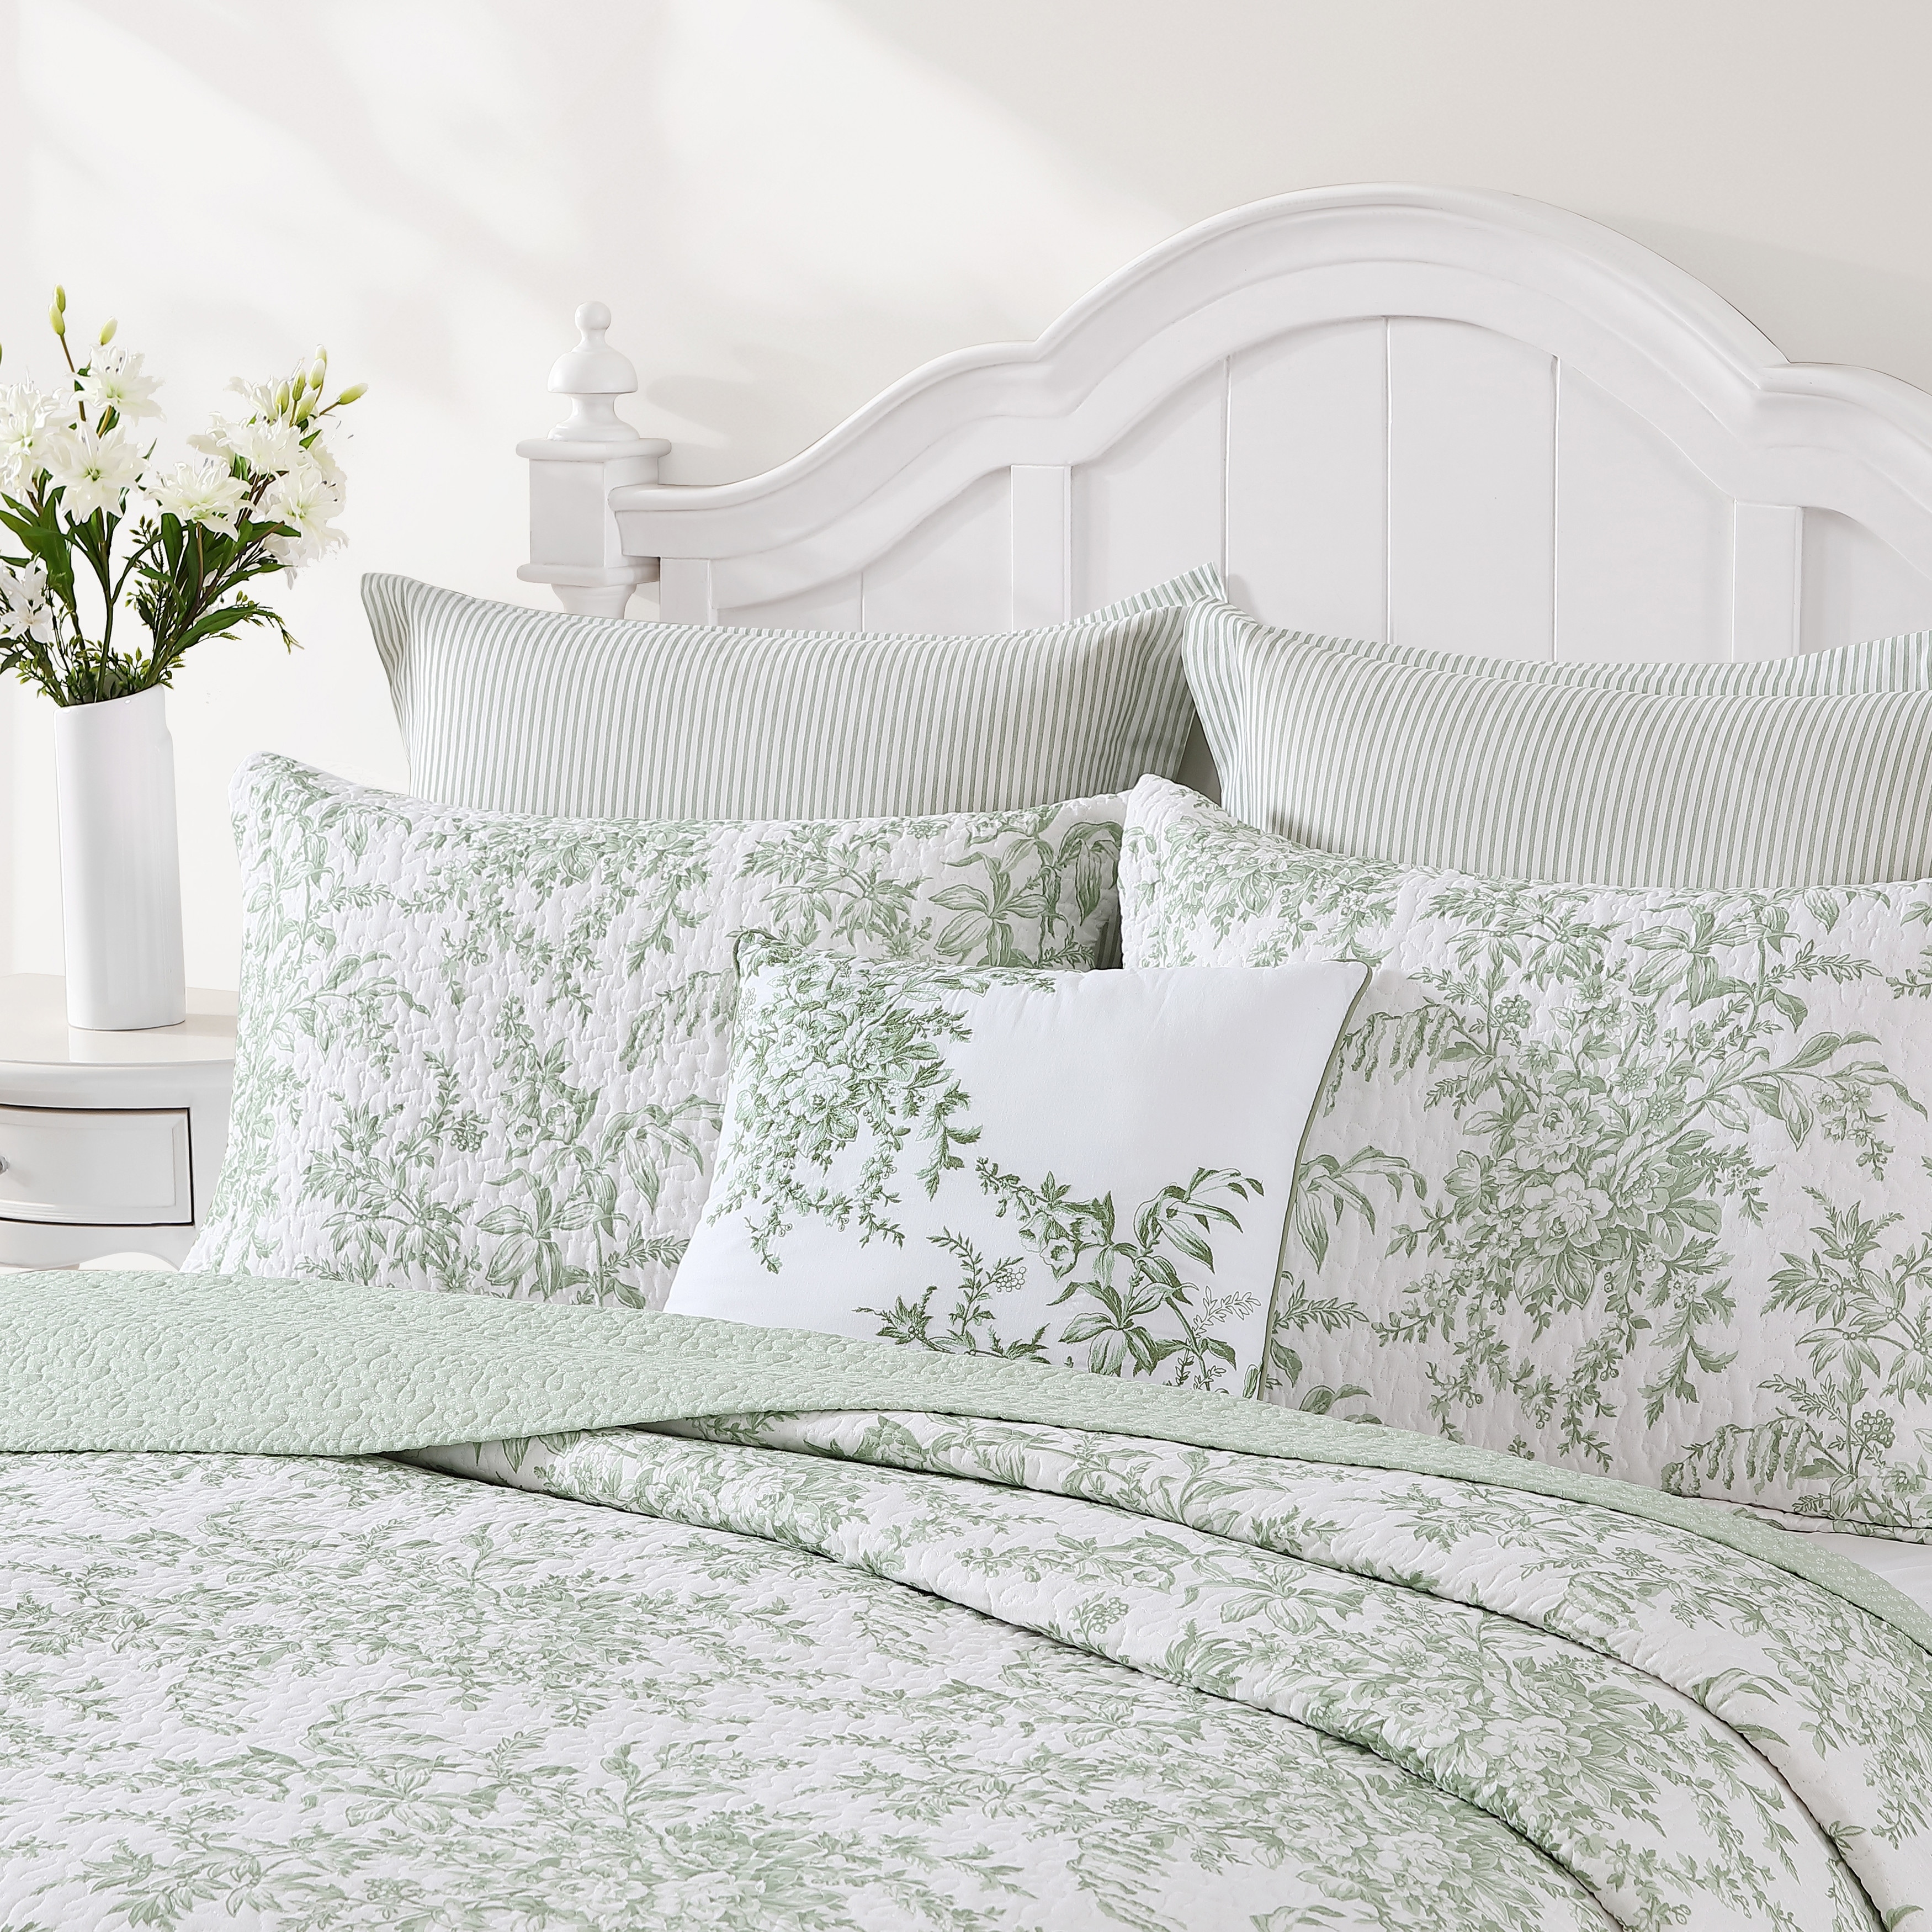 https://ak1.ostkcdn.com/images/products/is/images/direct/426dc96f21a3644525158c50166c6e92656c7f04/Laura-Ashley-Bedford-Embroidered-Cotton-Throw-Pillows.jpg